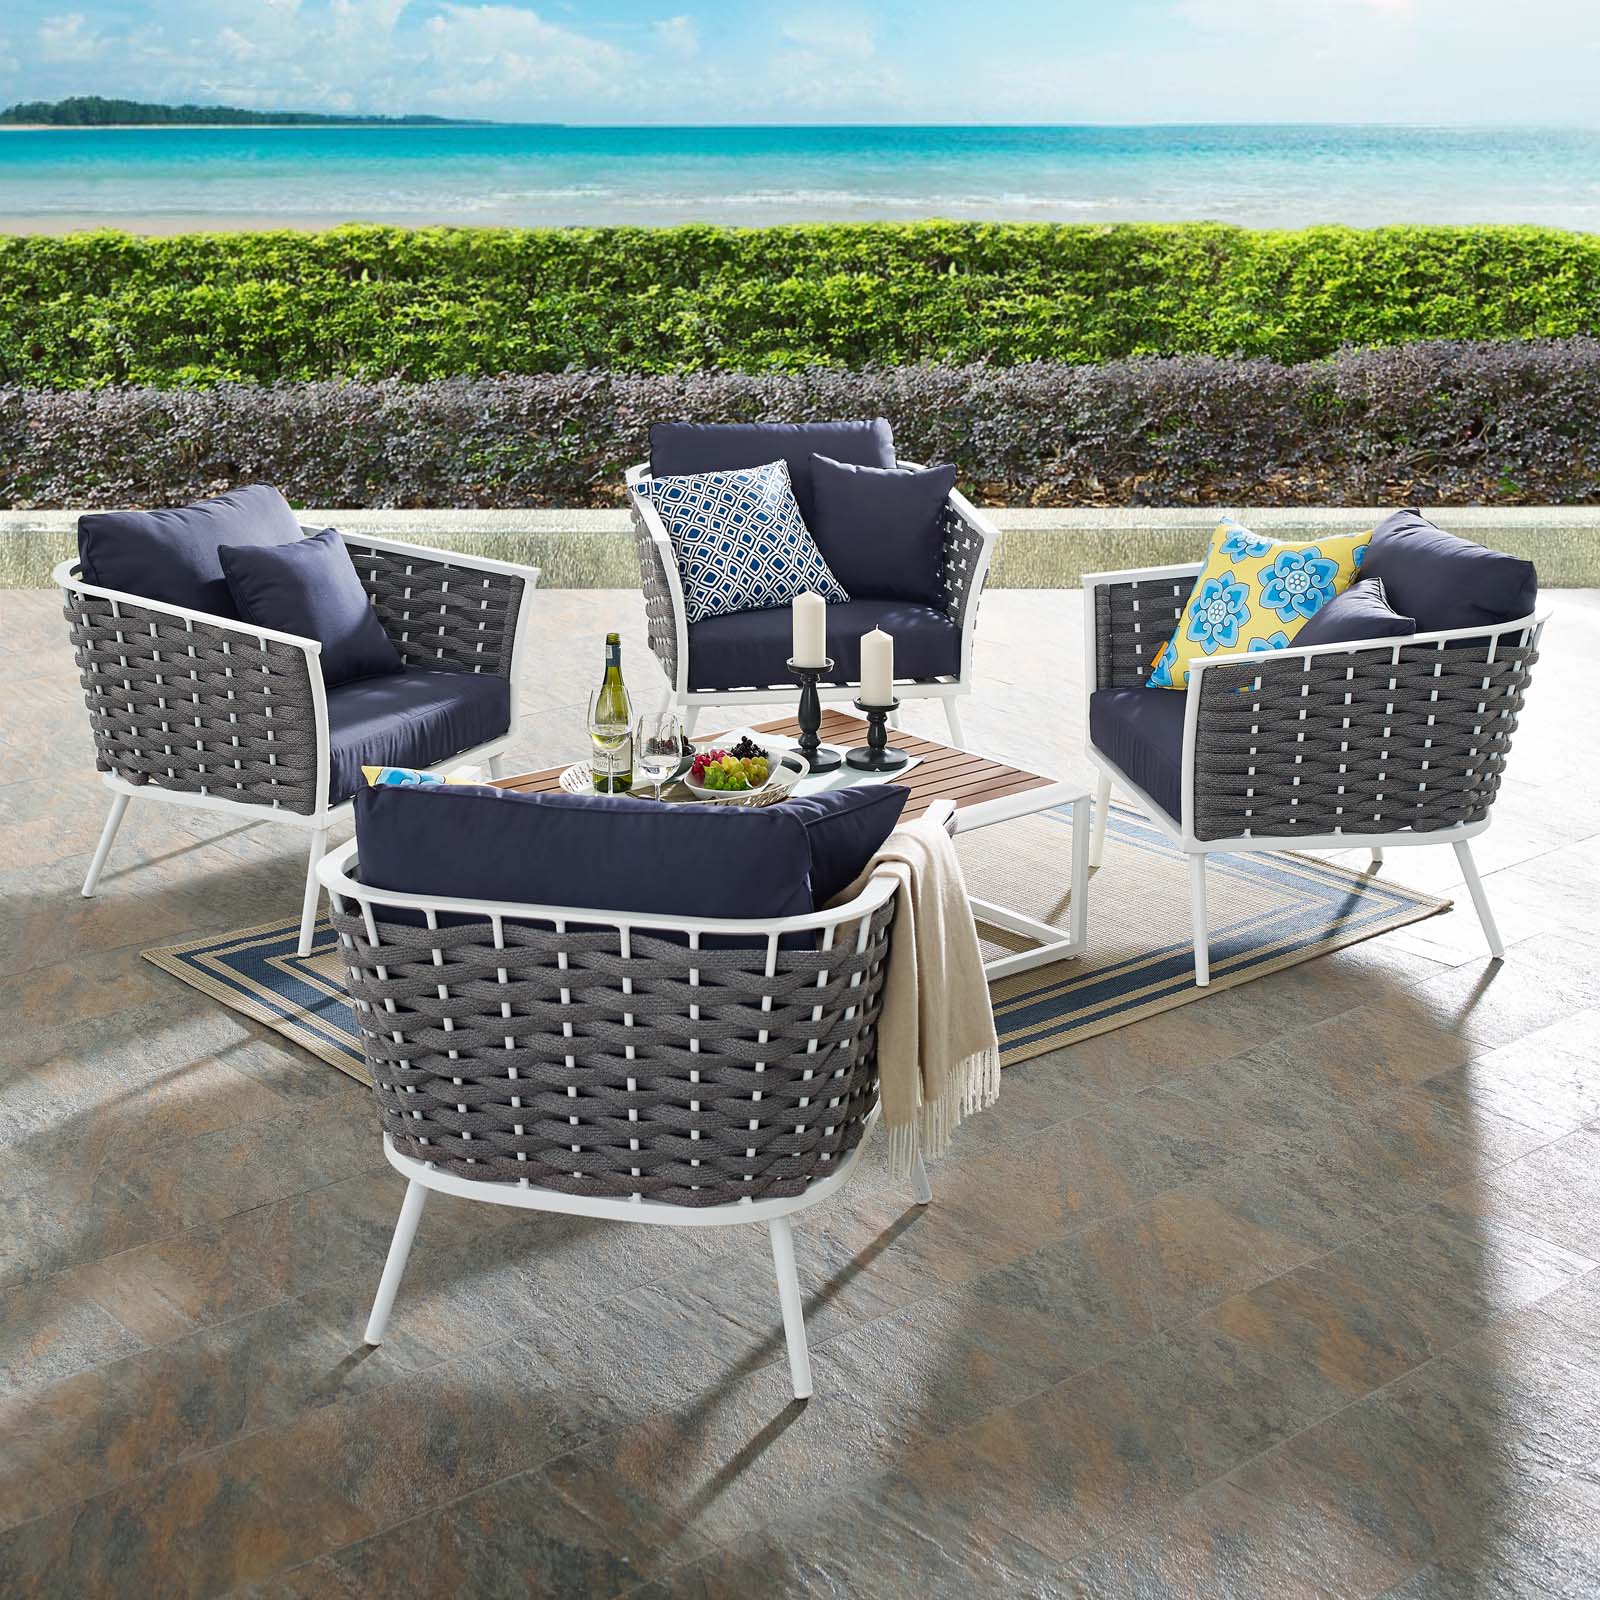 Modway Stance 5 Piece Outdoor Patio Aluminum Sectional Sofa Set in White Navy - image 1 of 8